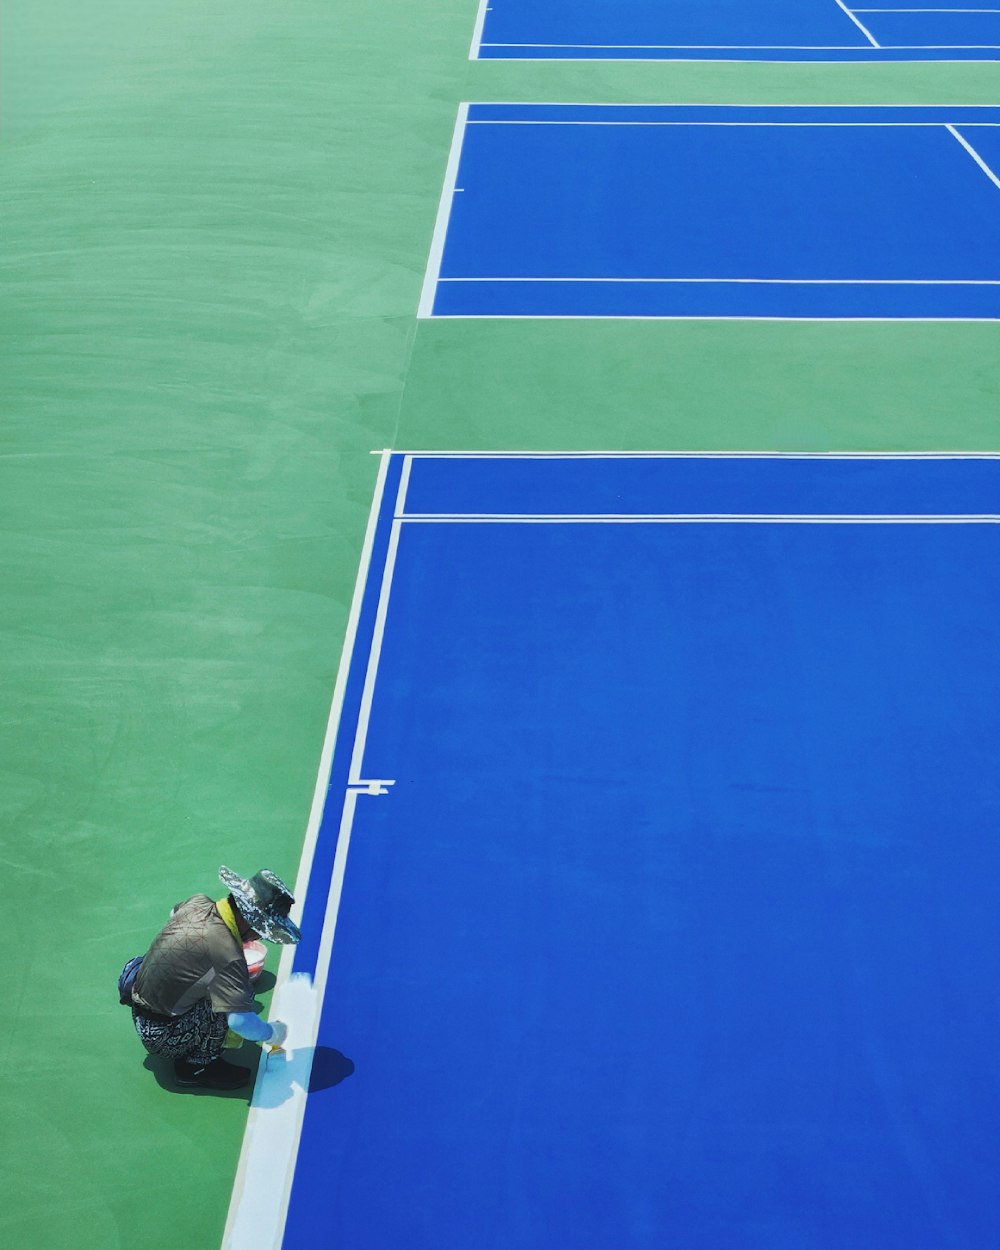 a person kneeling down on a tennis court